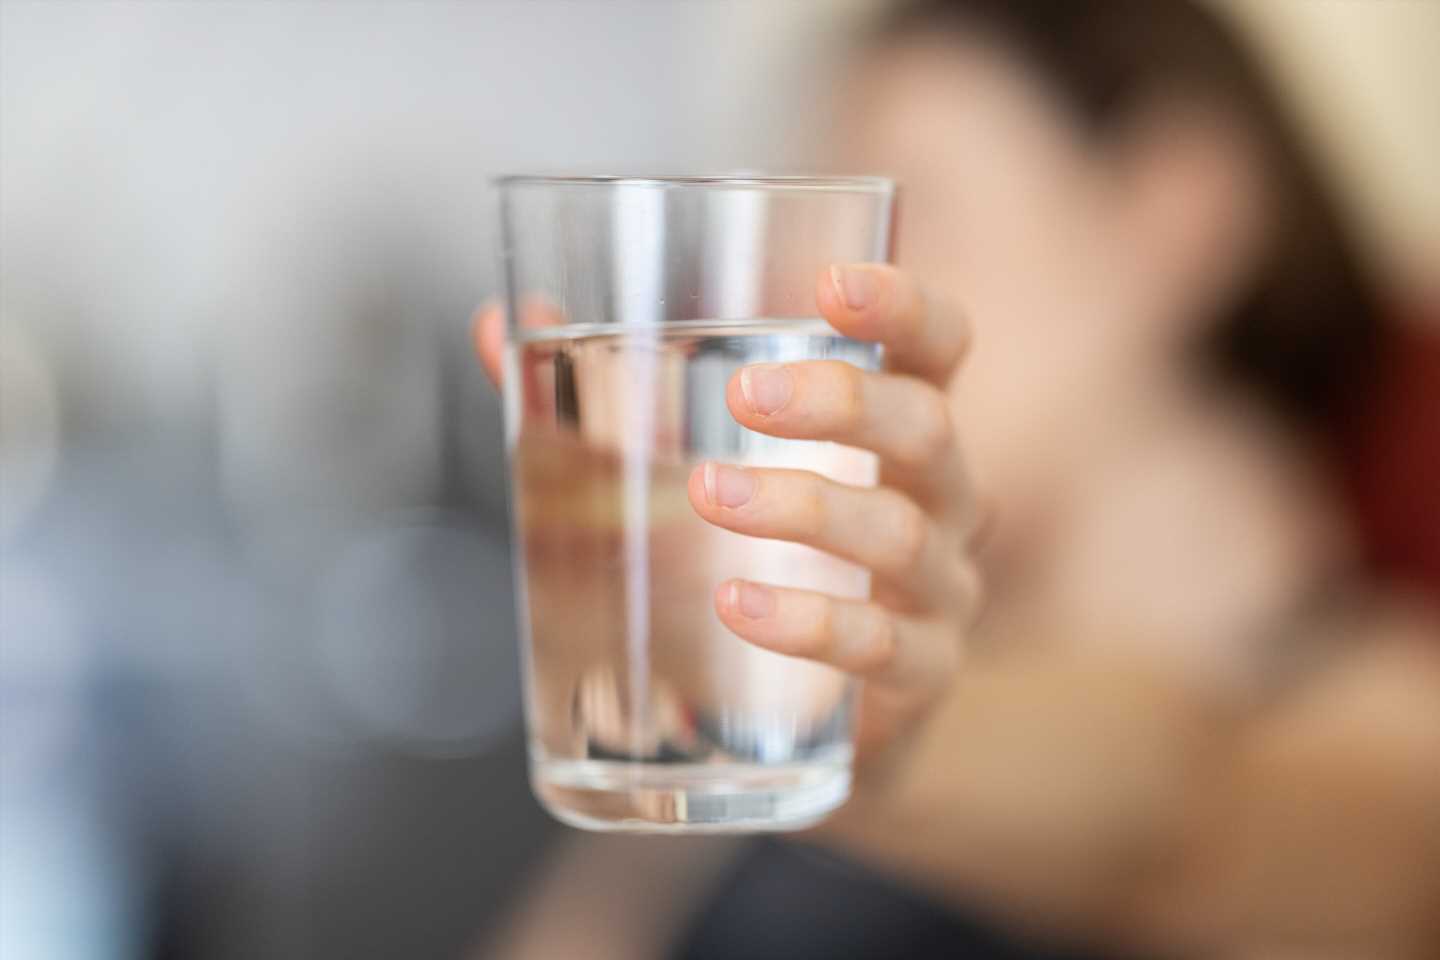 New study suggests gargling with salt water may be associated with lower COVID hospitalization